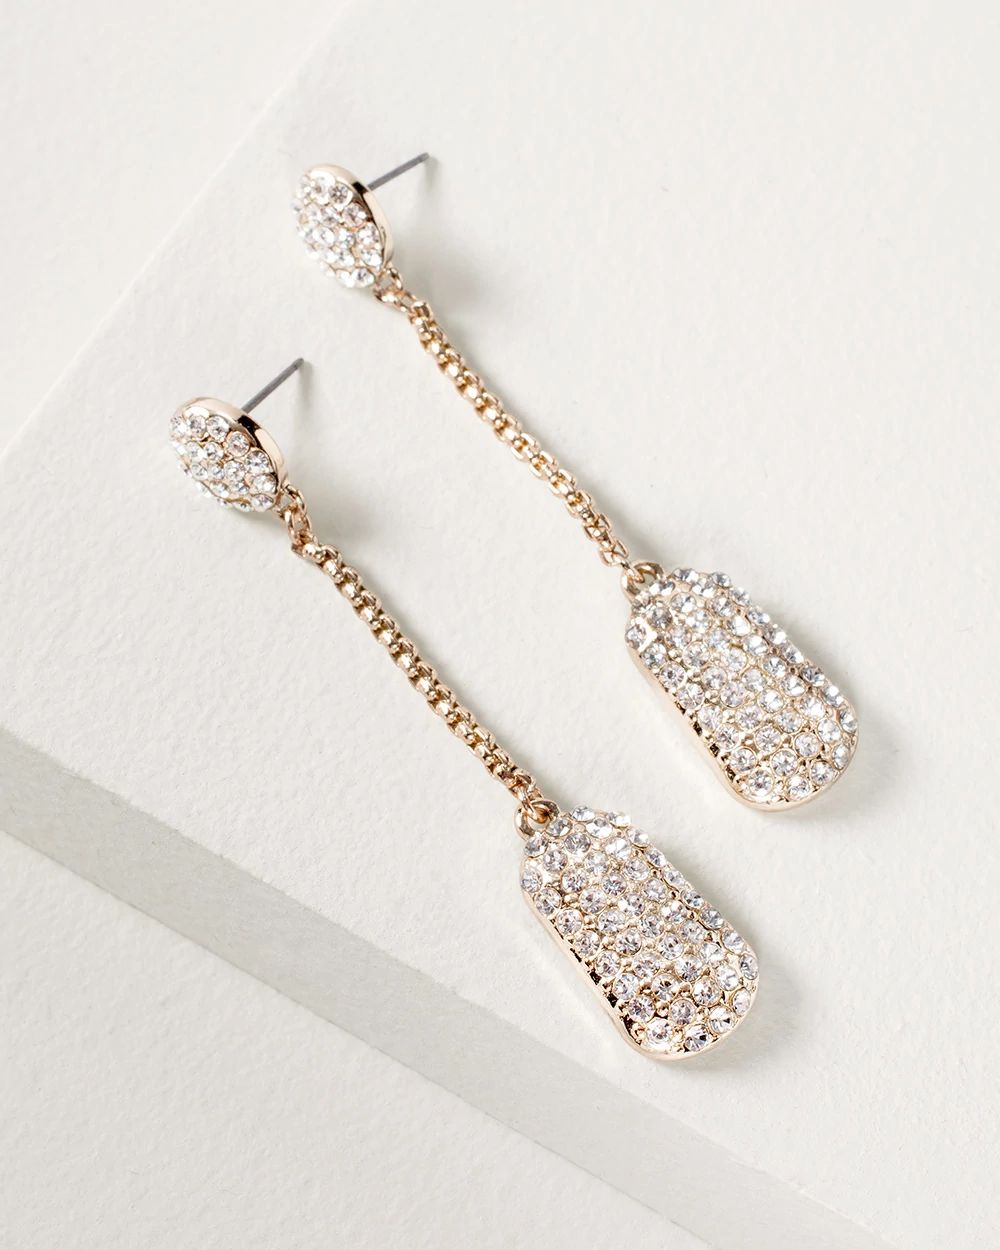 Pav  Goldtone Linear Drop Earrings click to view larger image.